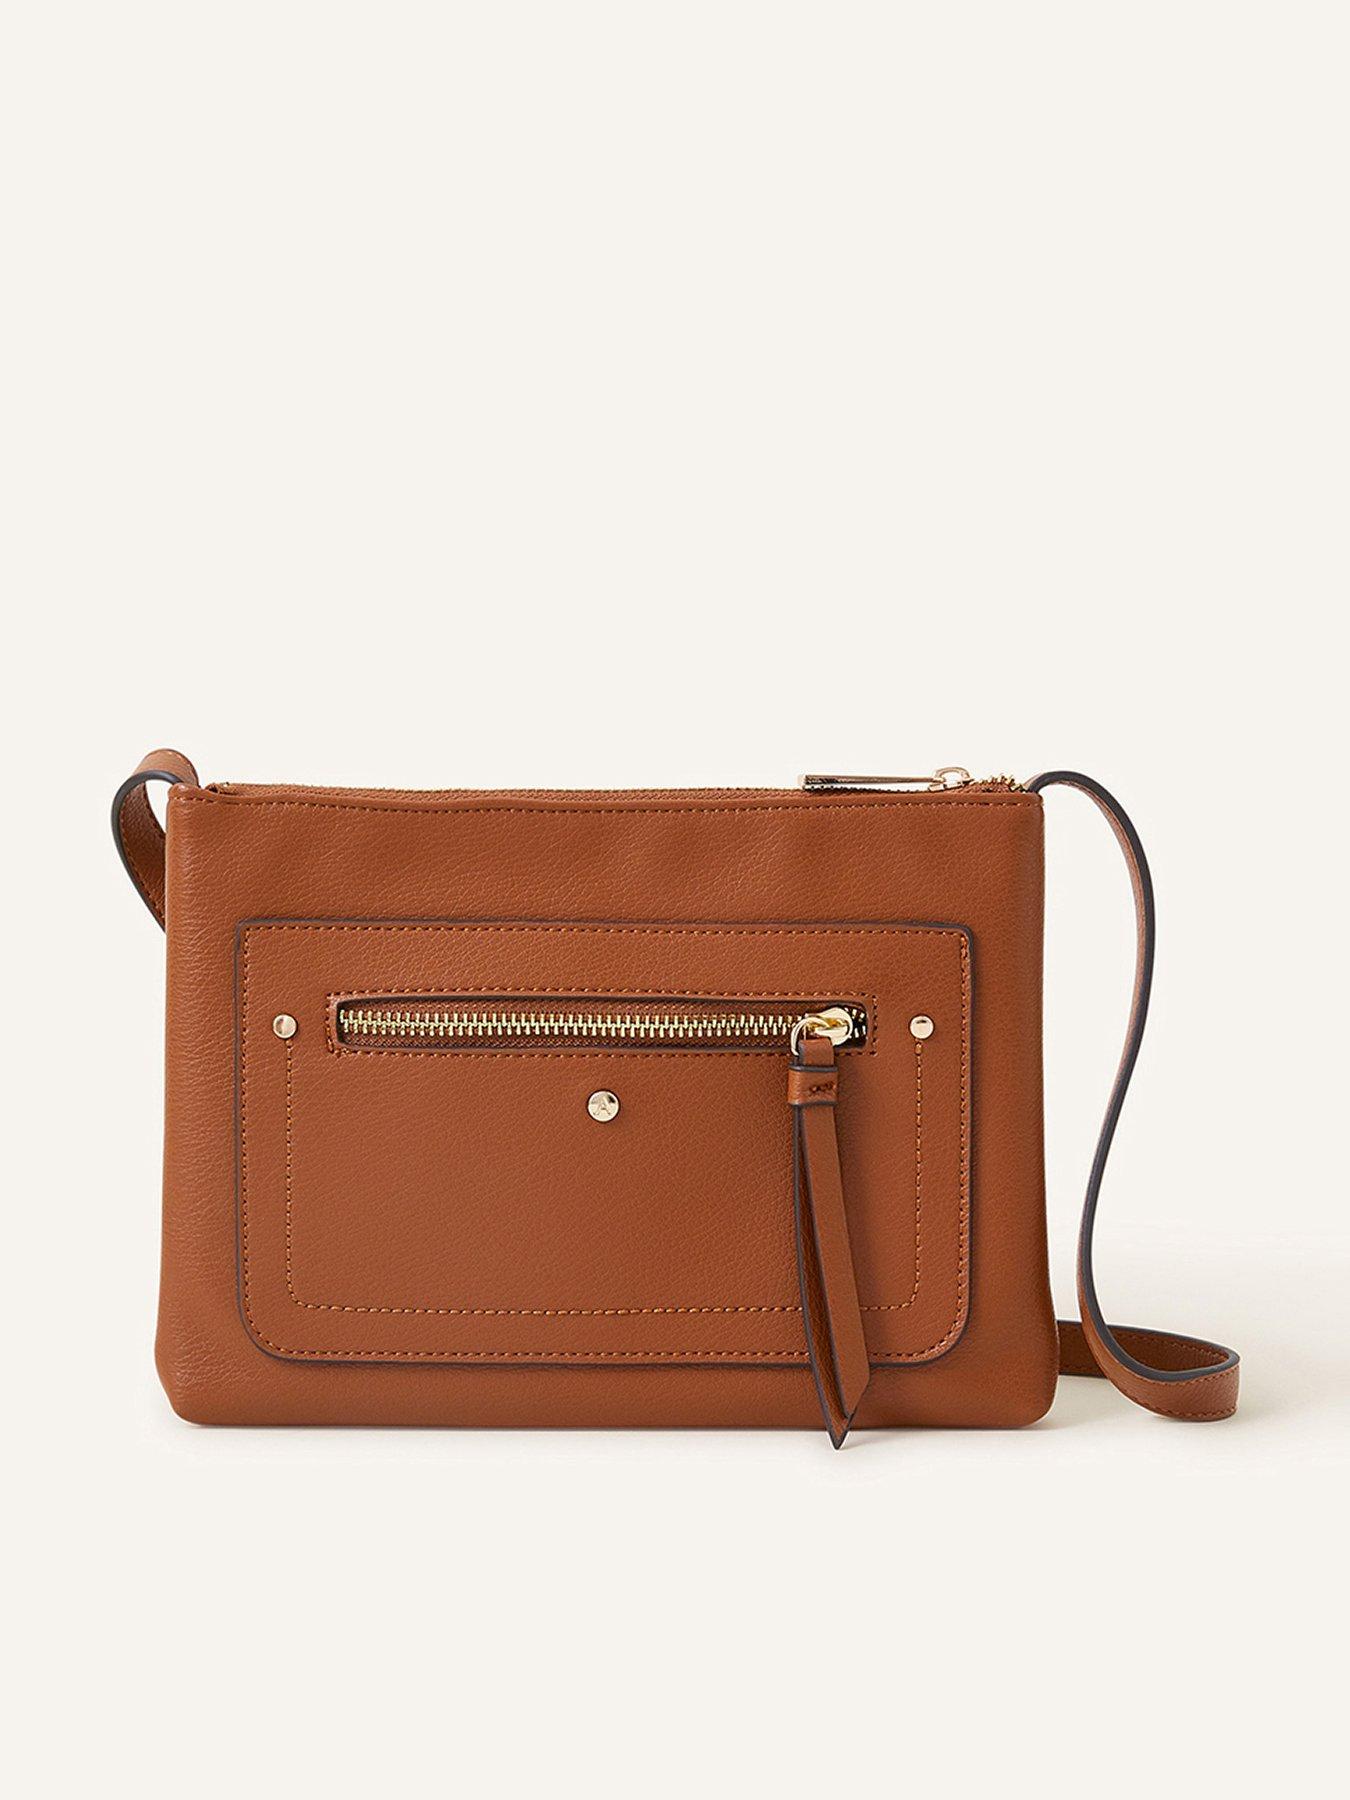 Michael Kors Oxblood Leather Half-Dome Crossbody Bag | Best Price and  Reviews | Zulily